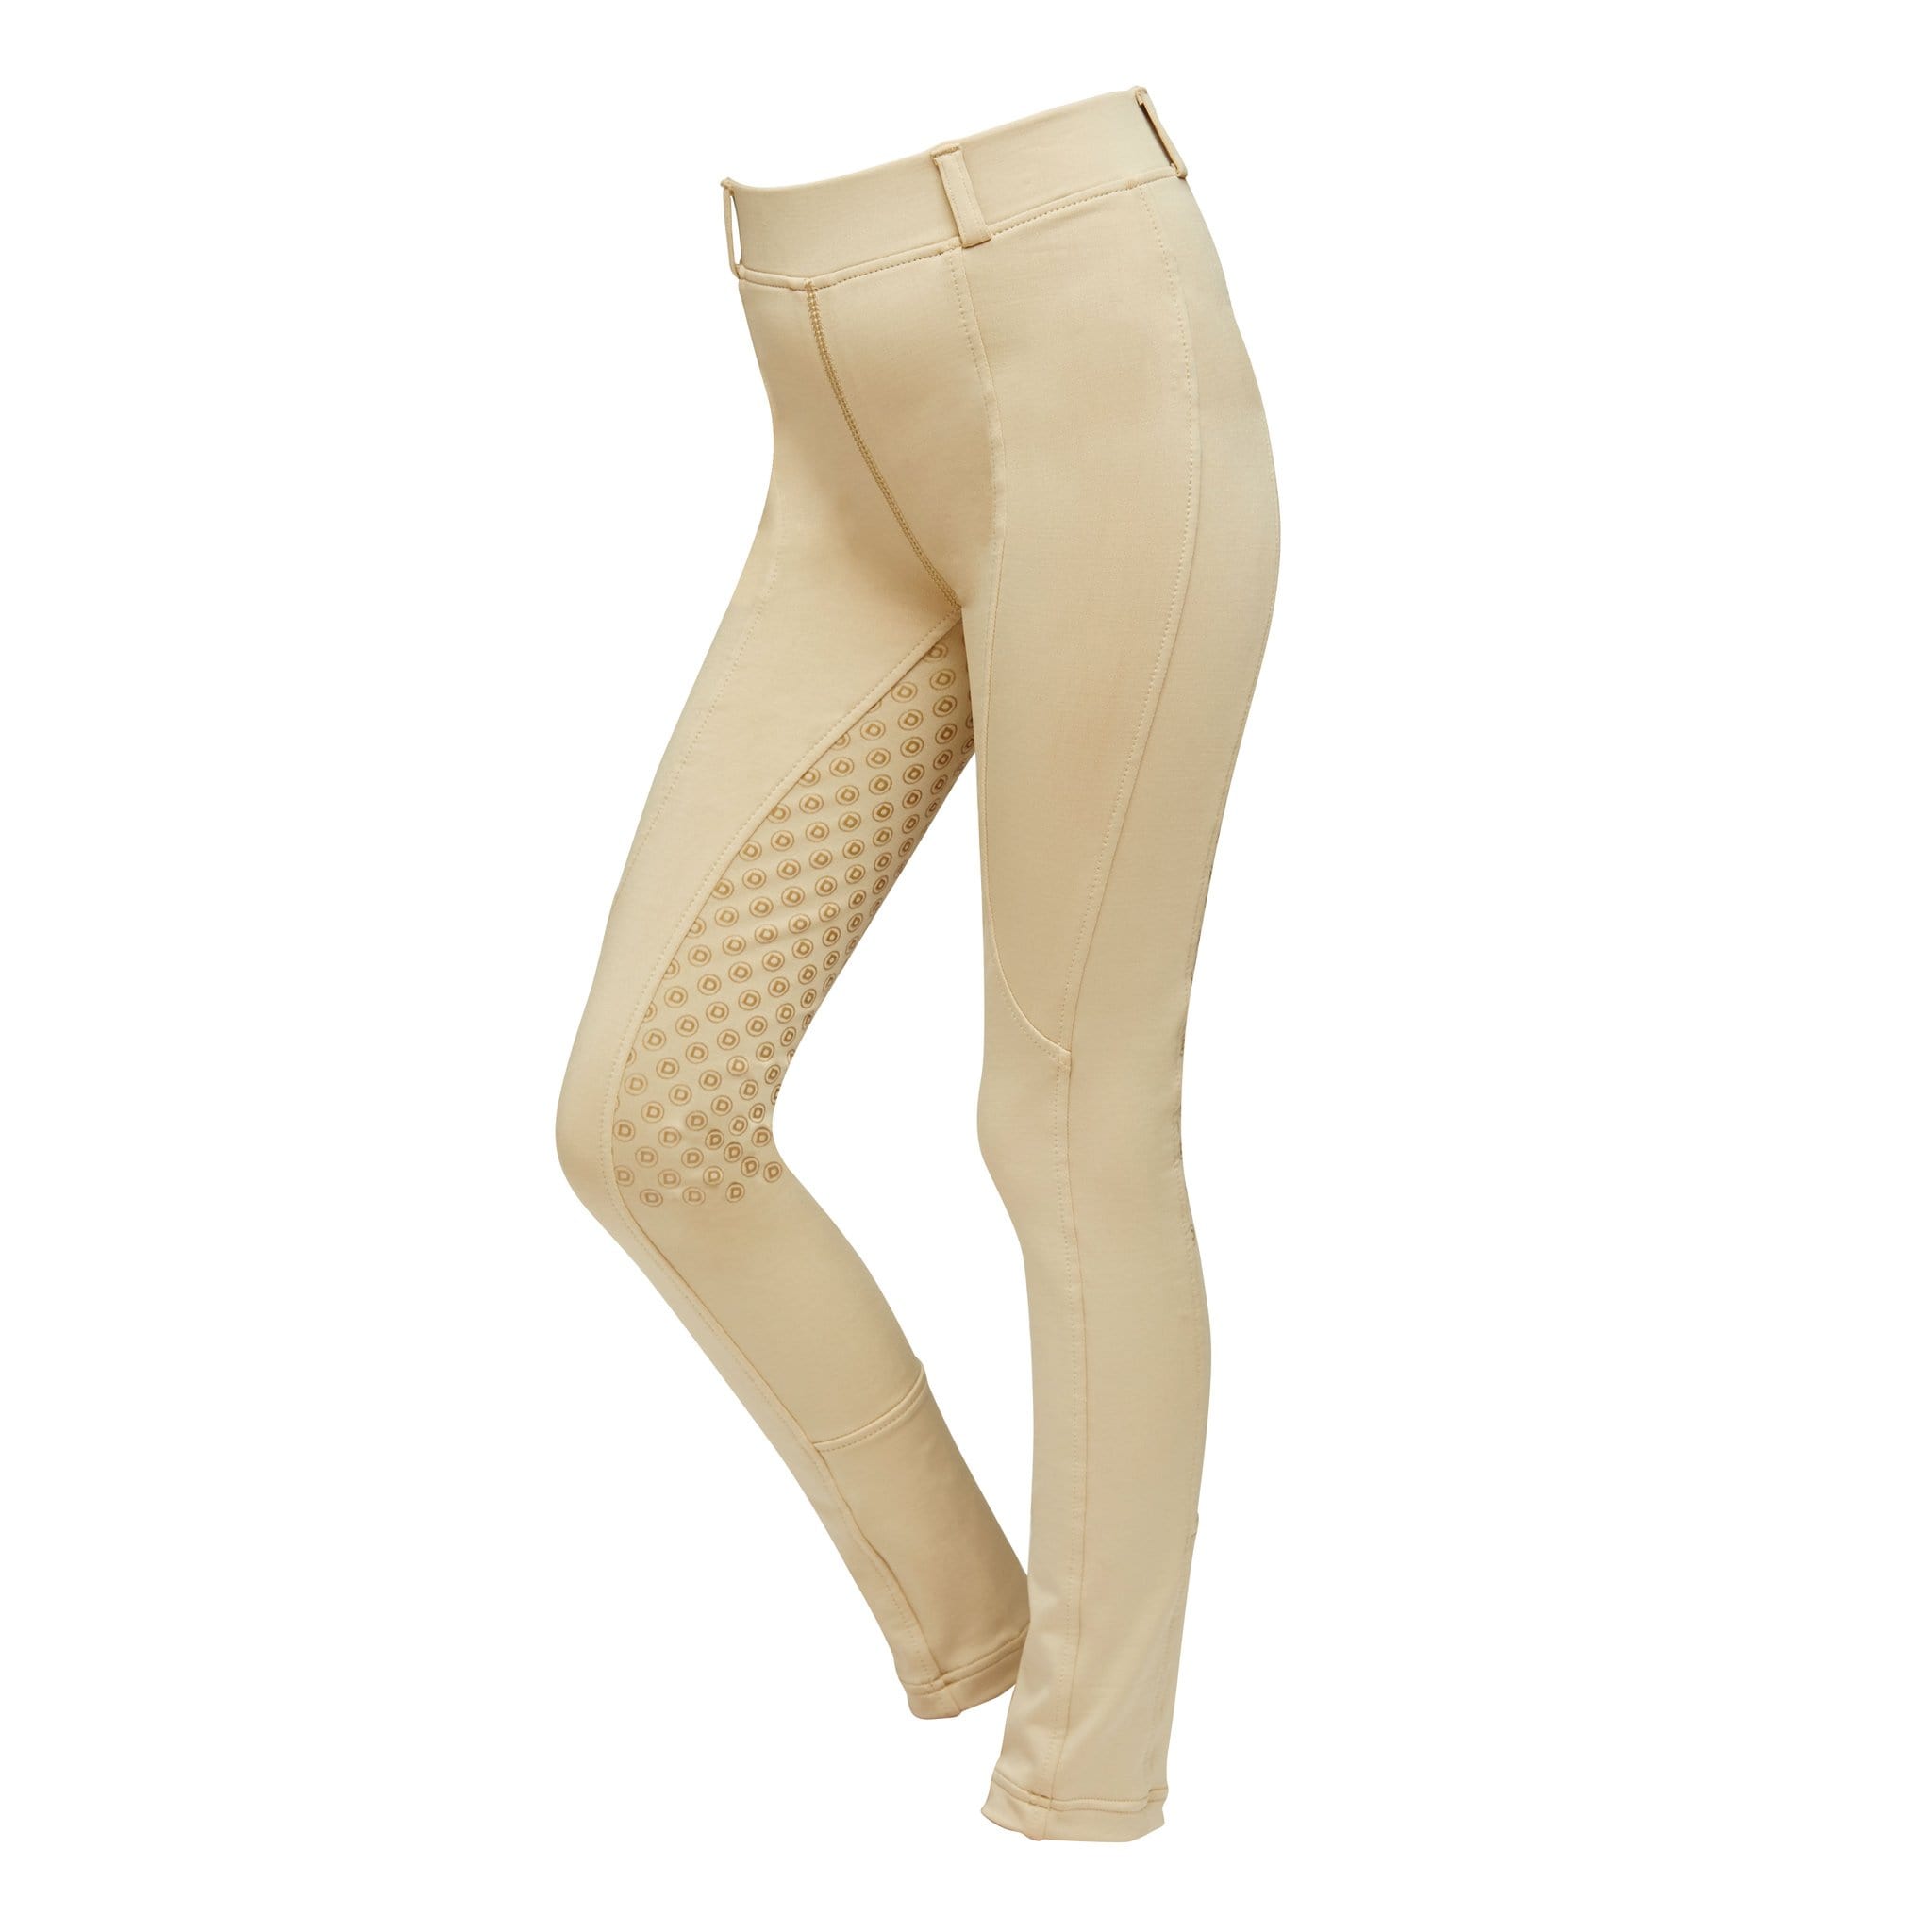 Dublin Children's Performance Cool-It Gel Silicone Full Seat Riding Tights 800730 Beige Front.